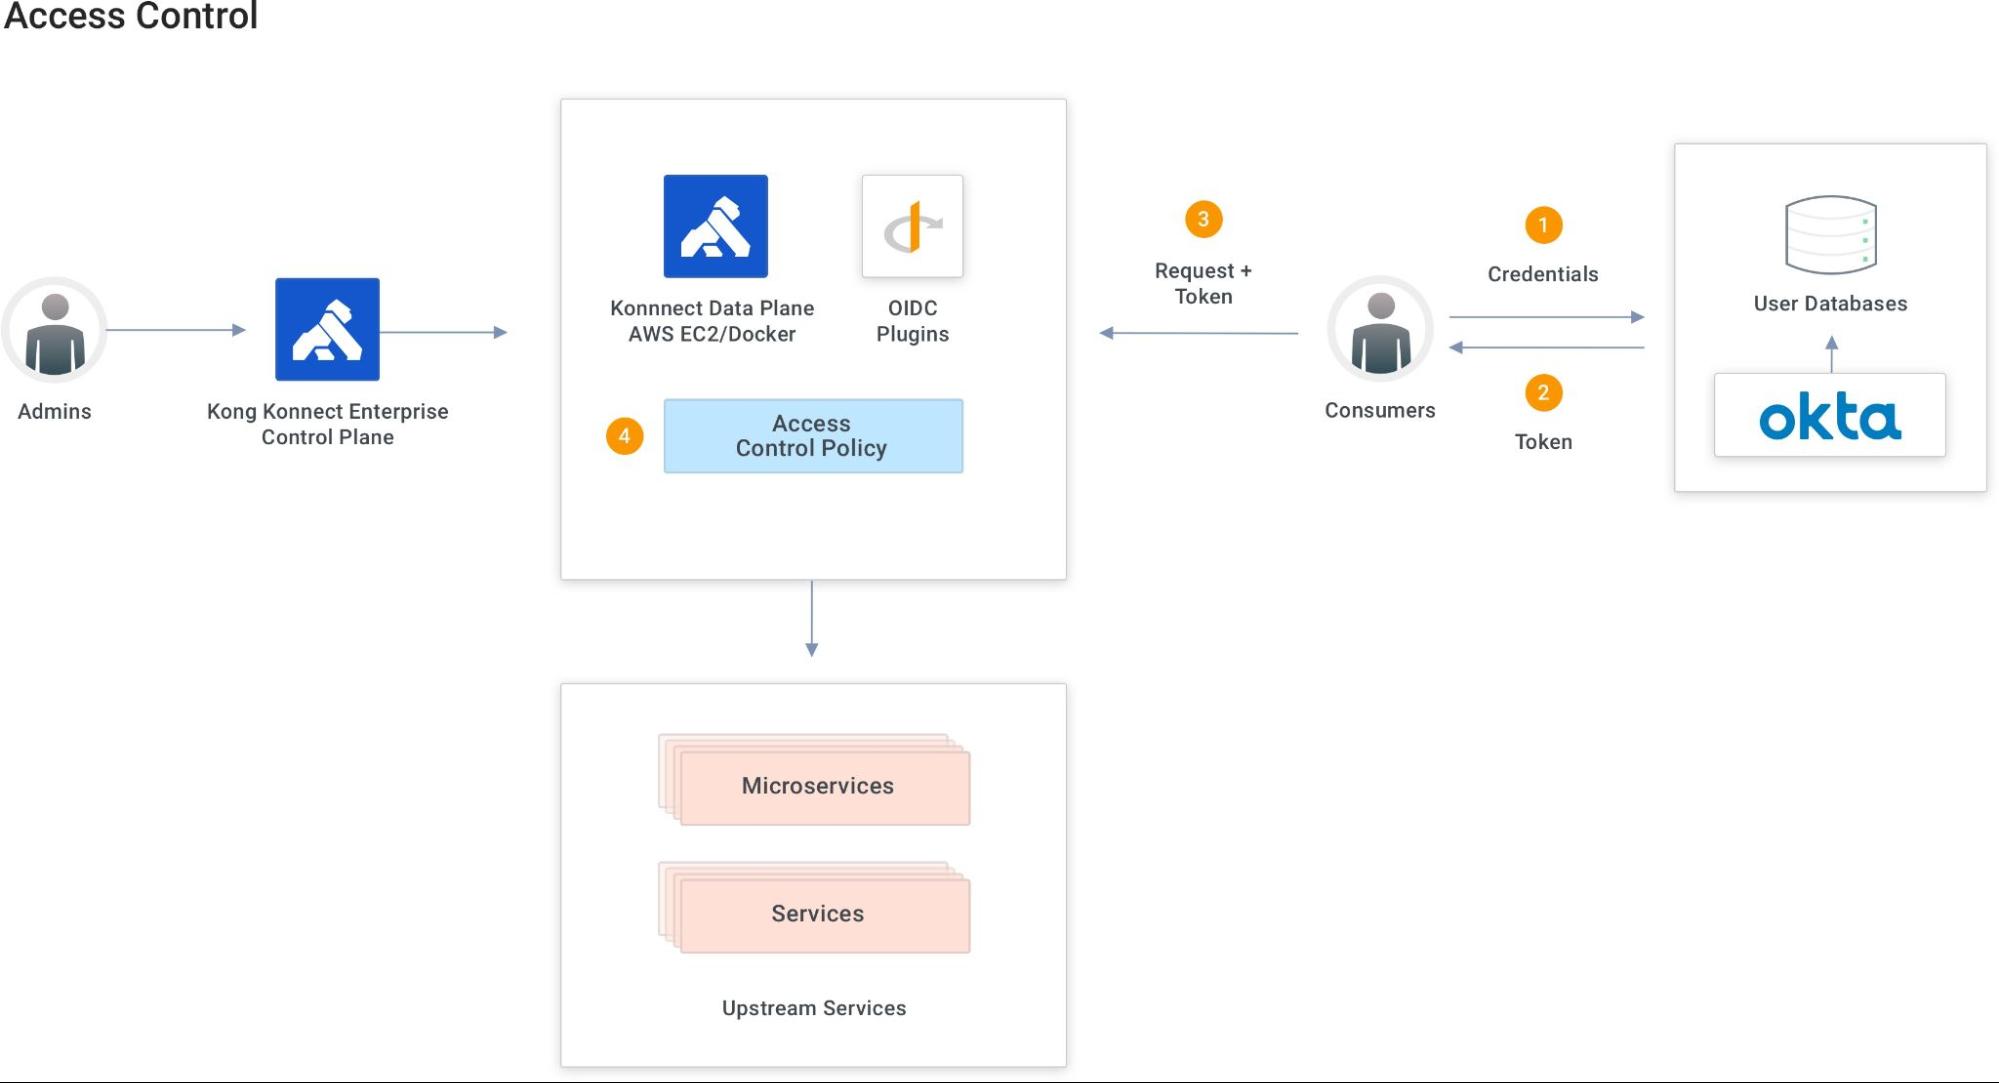 Okta and Kong Konnect Access Control Policies Architecture